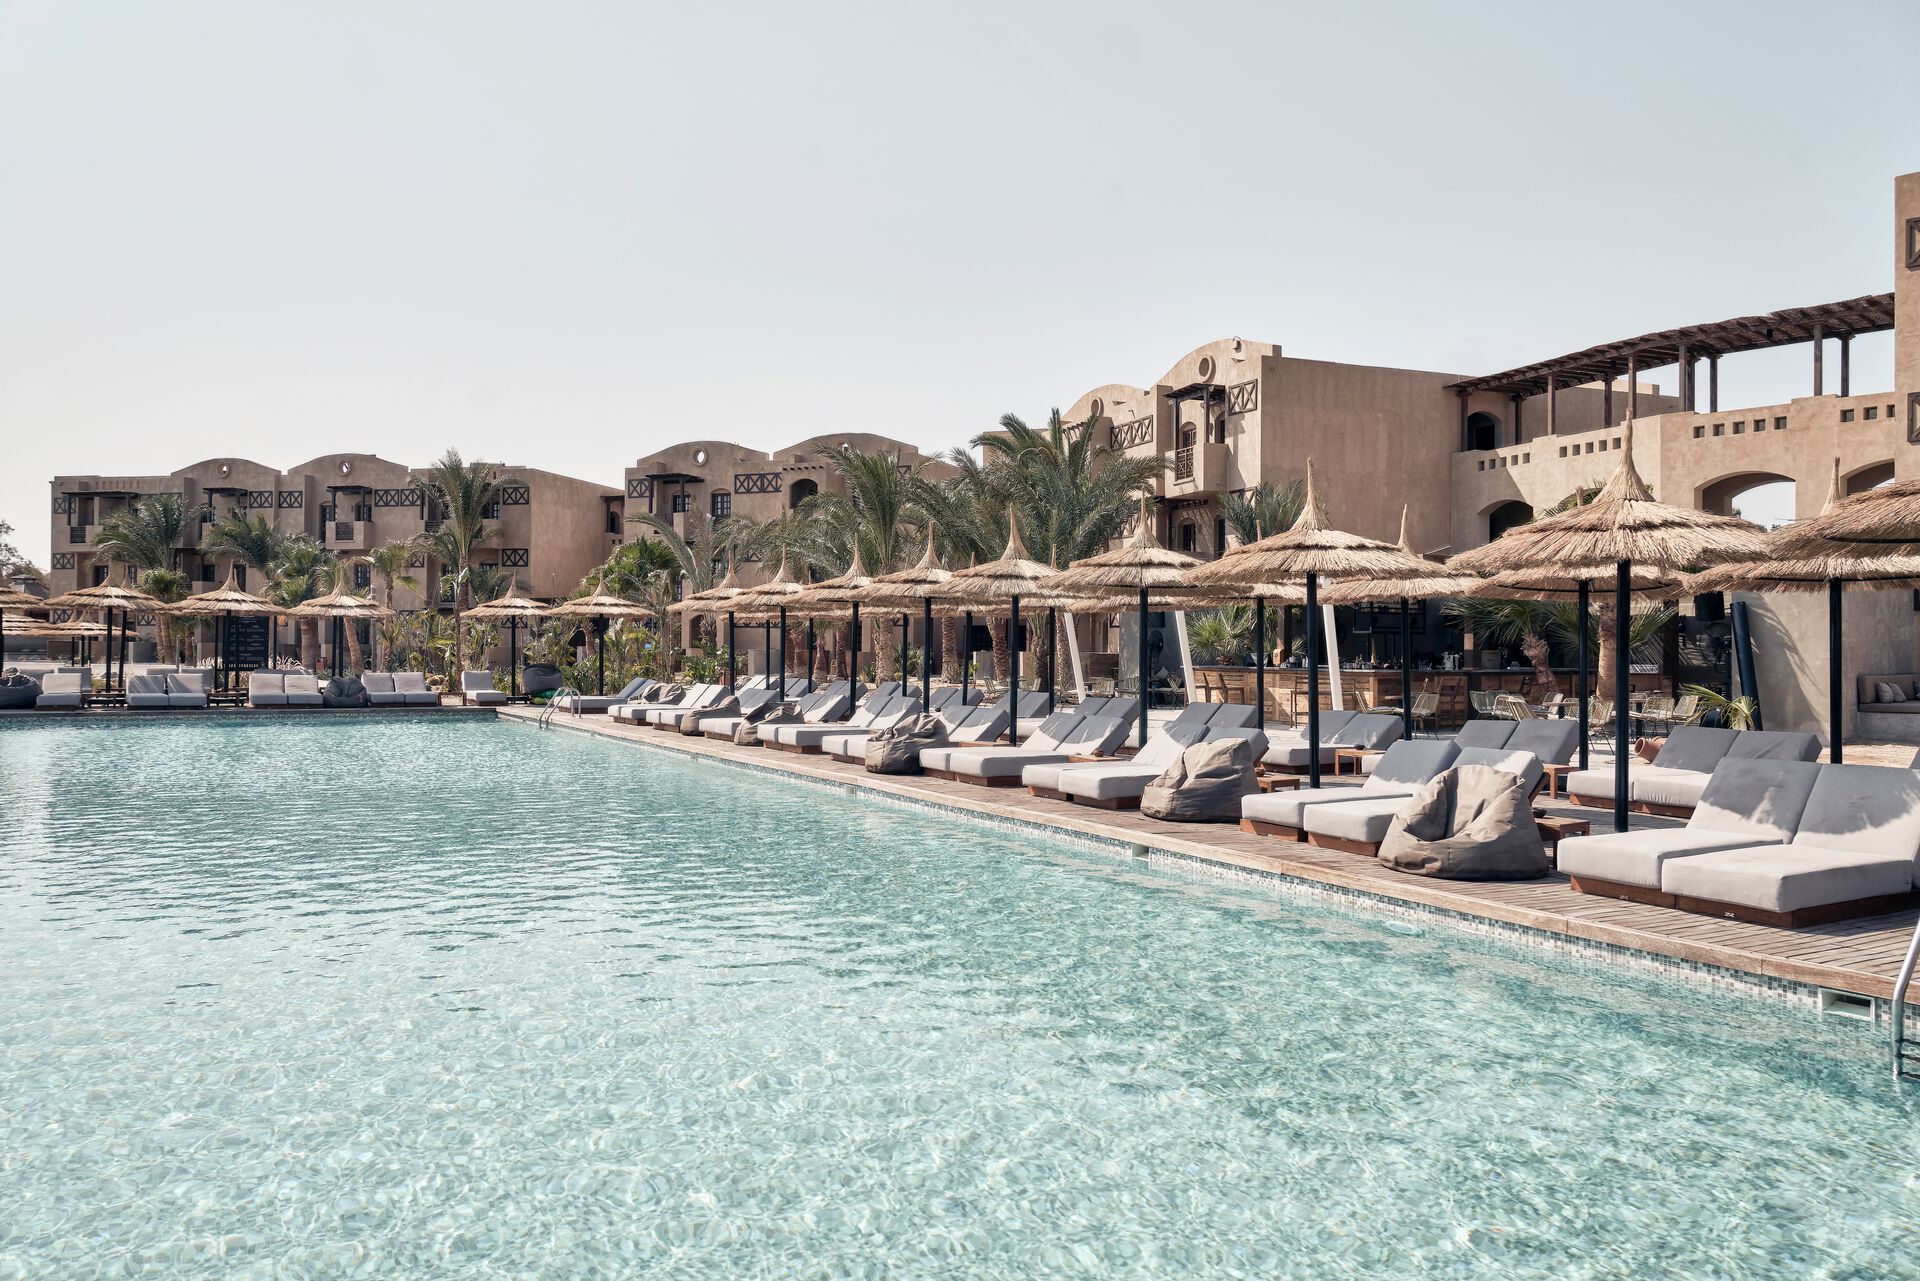 Cook's Club El Gouna - Adult Only - 4*